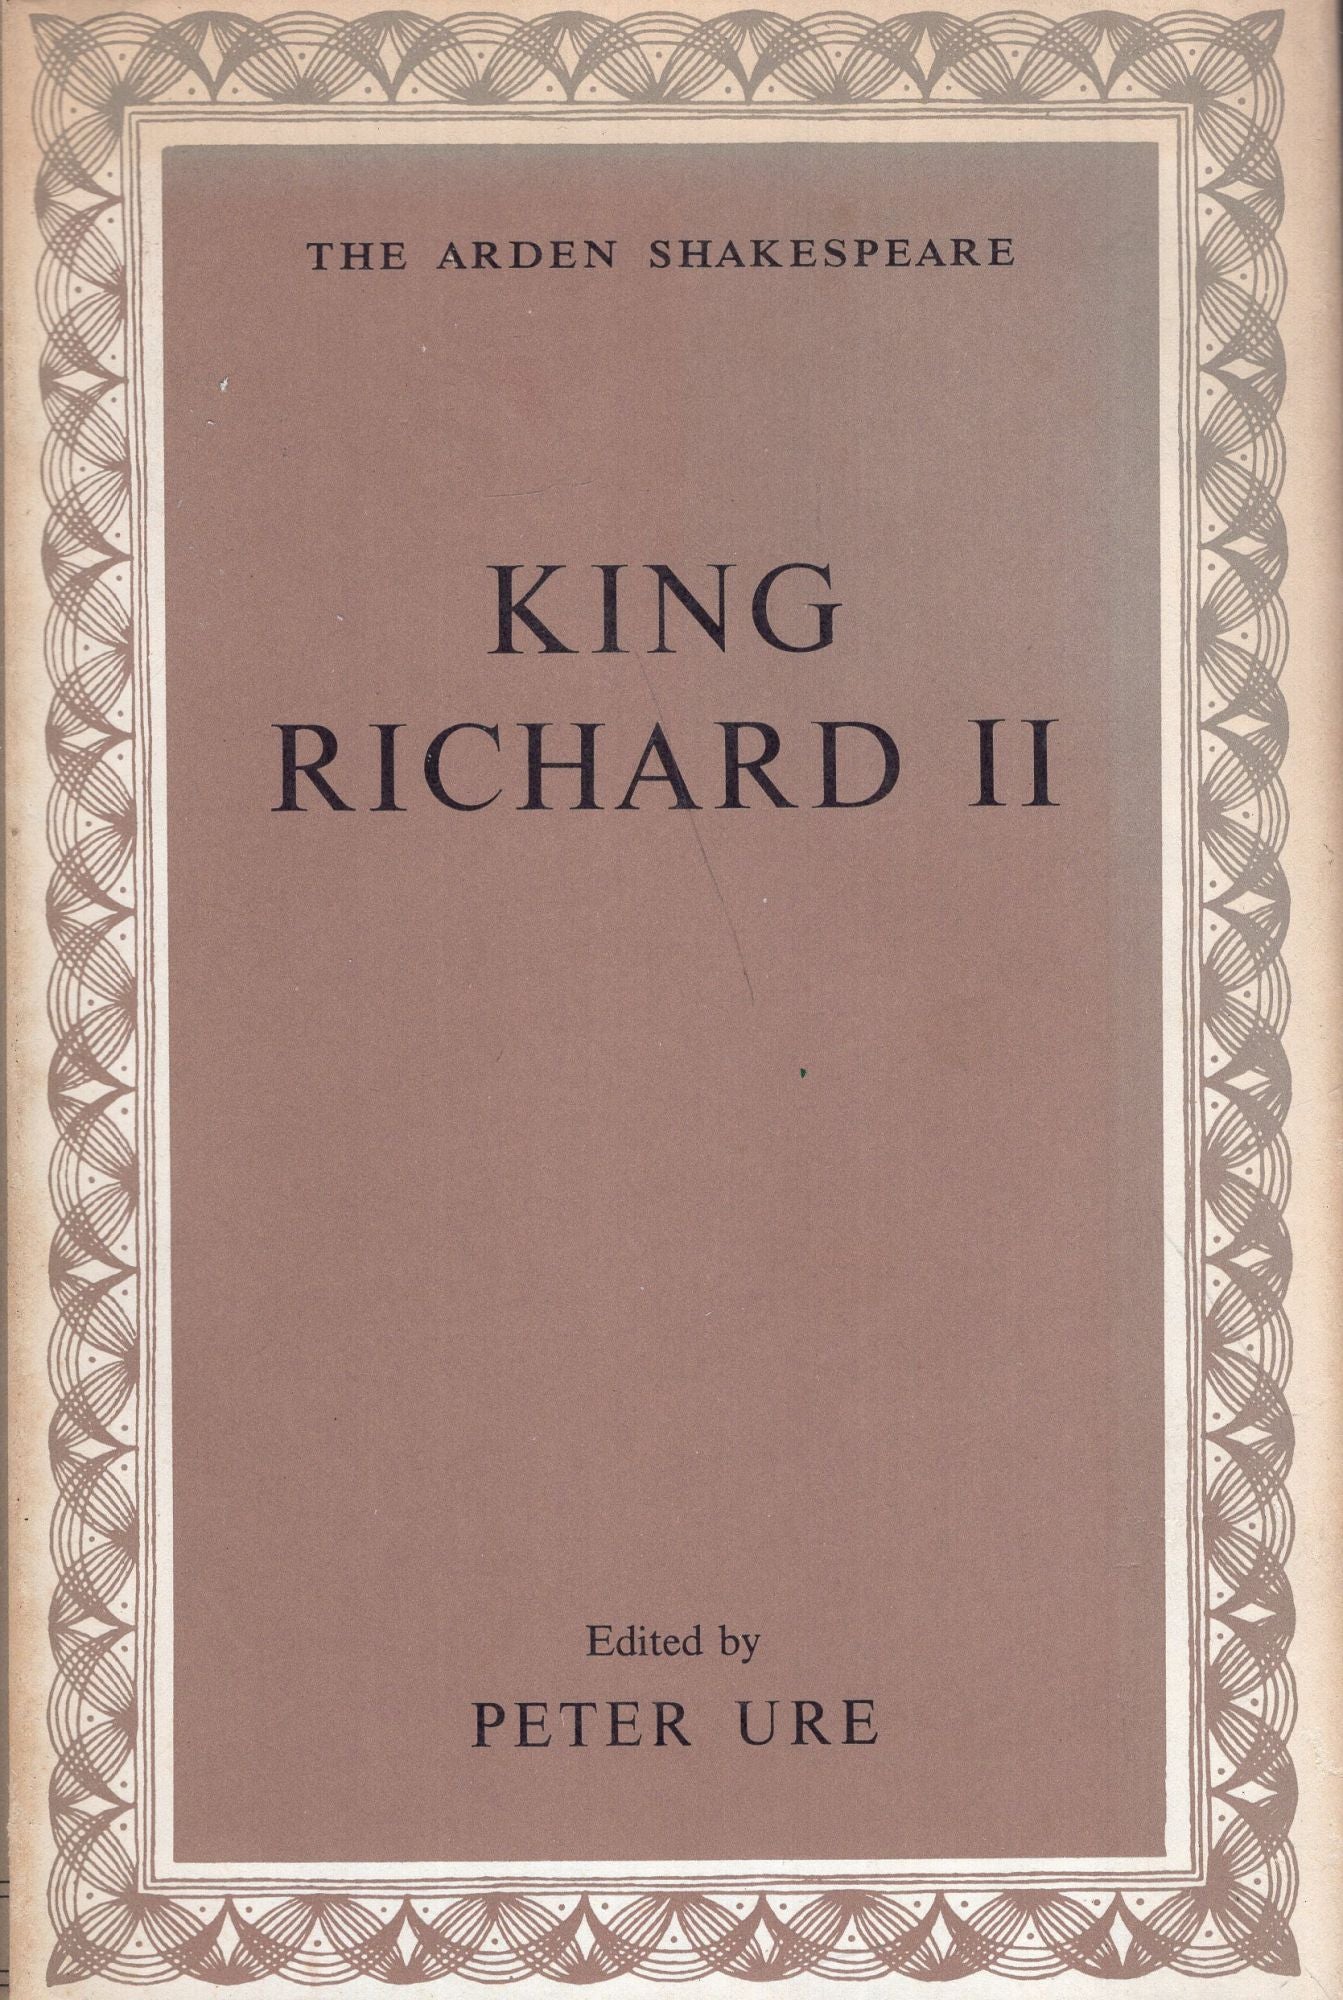 of　Peter　King　Works　of　Edition　Richard　Shakespeare　II　Arden　Shakespeare　the　William　William　Ure,　Reprint